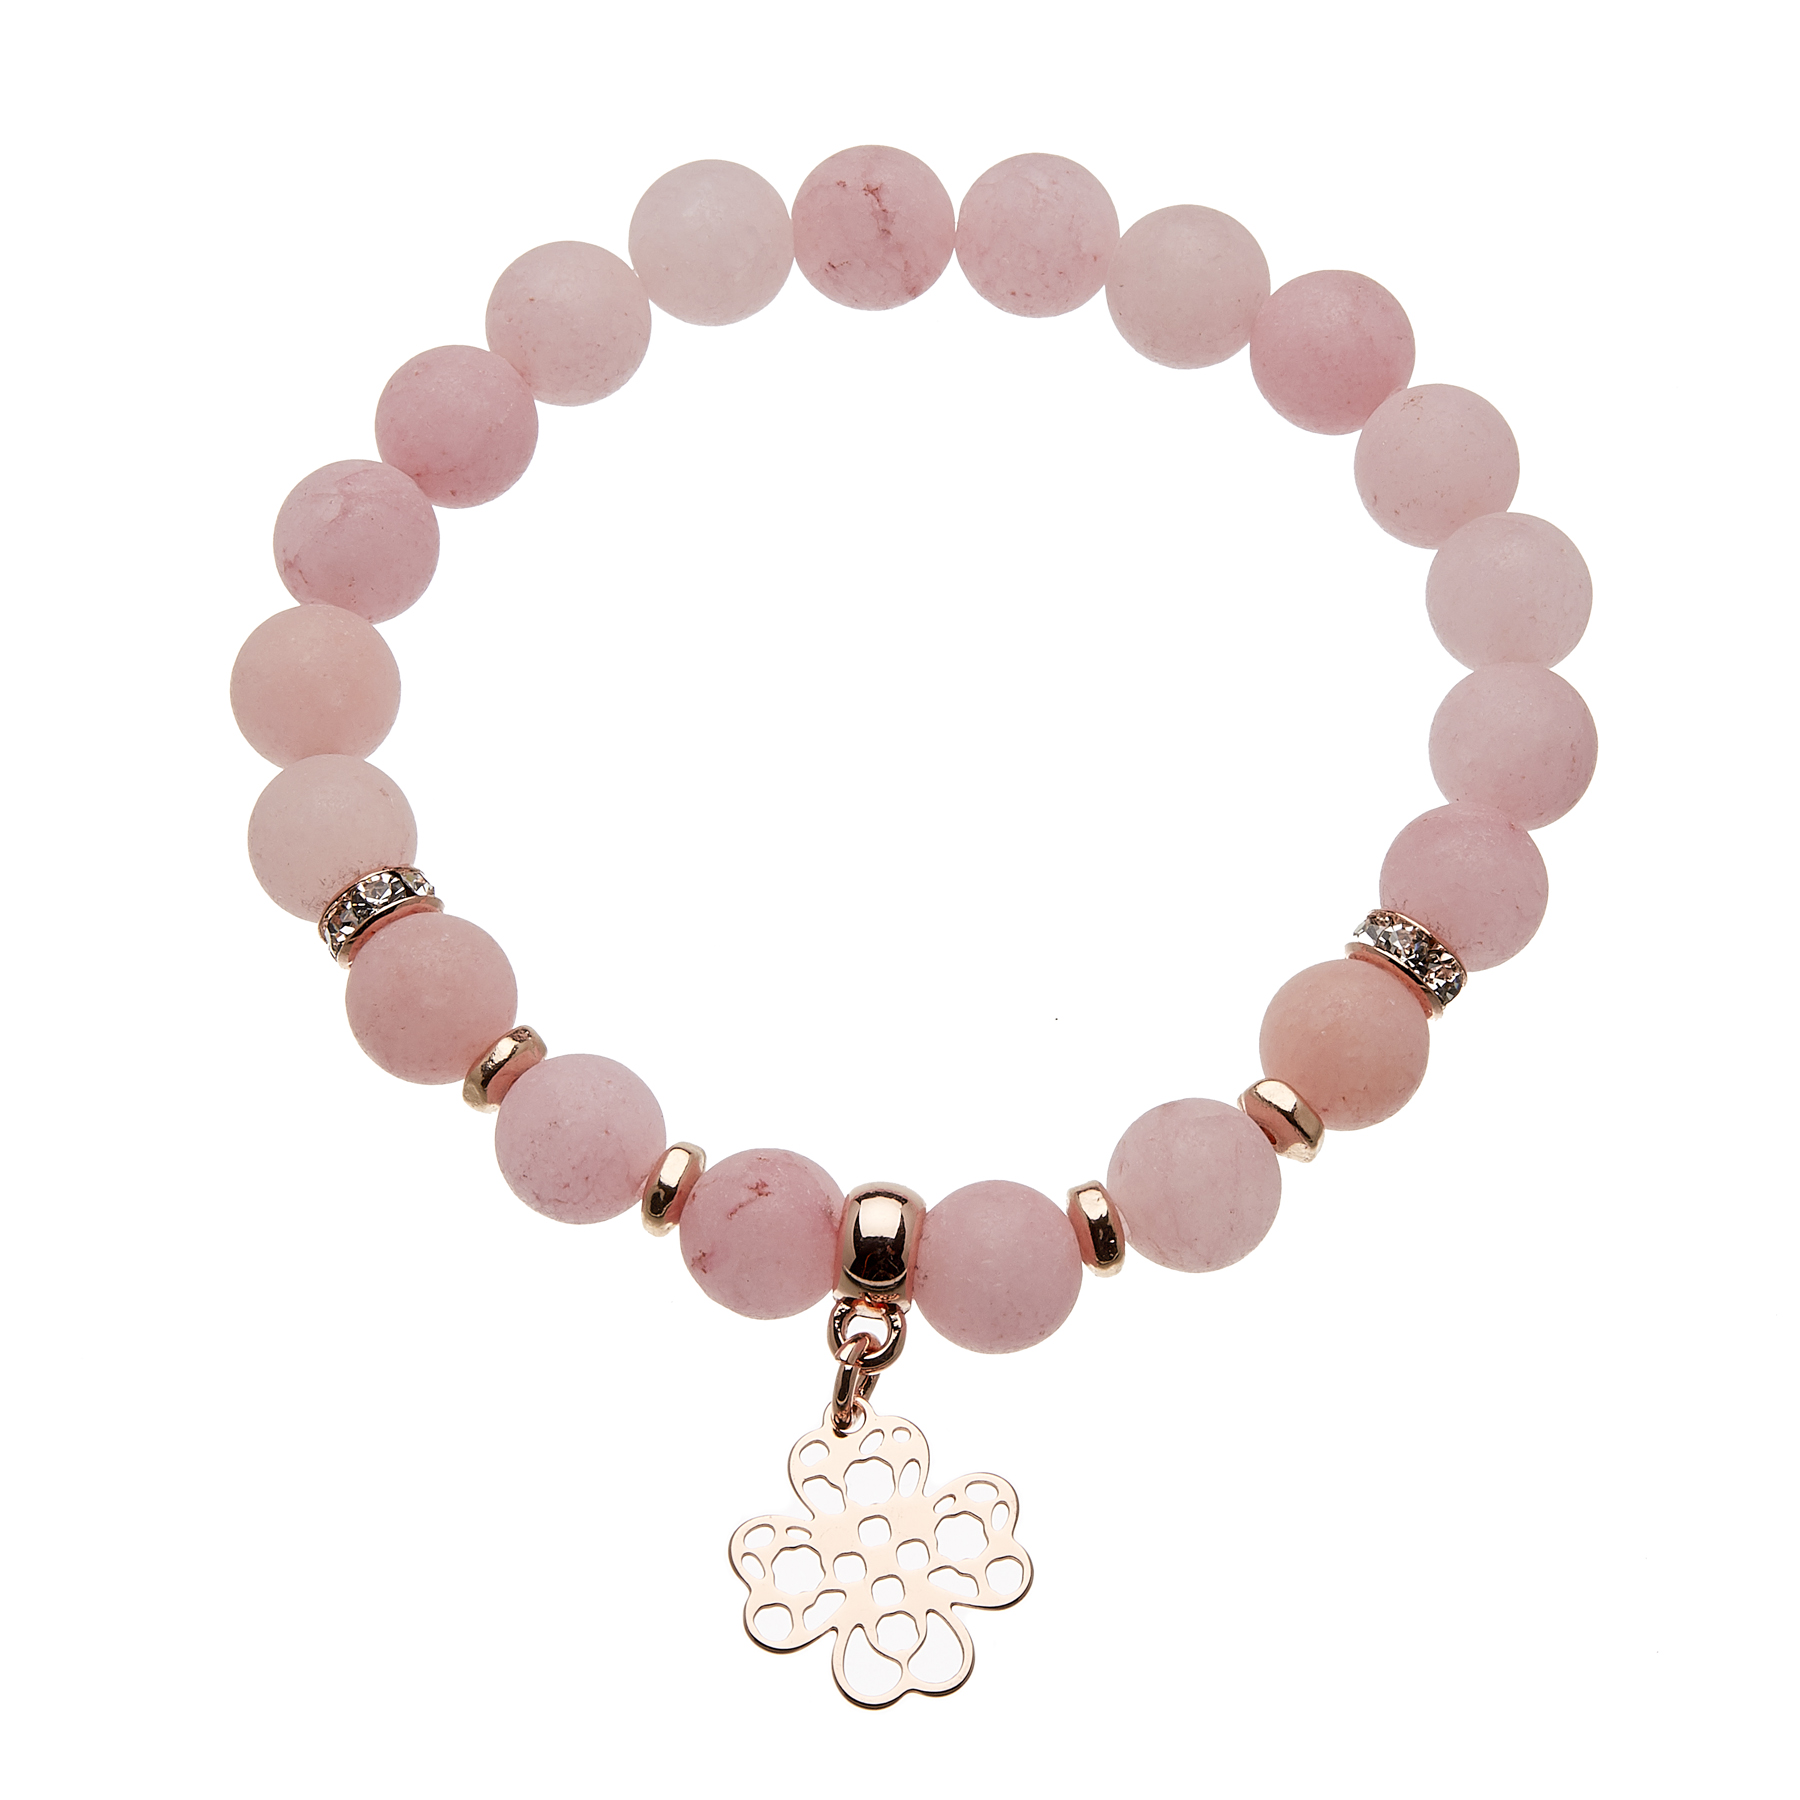 Matt pink jade beaded Bracelet with a rose gold charm and crystals - Rae P19